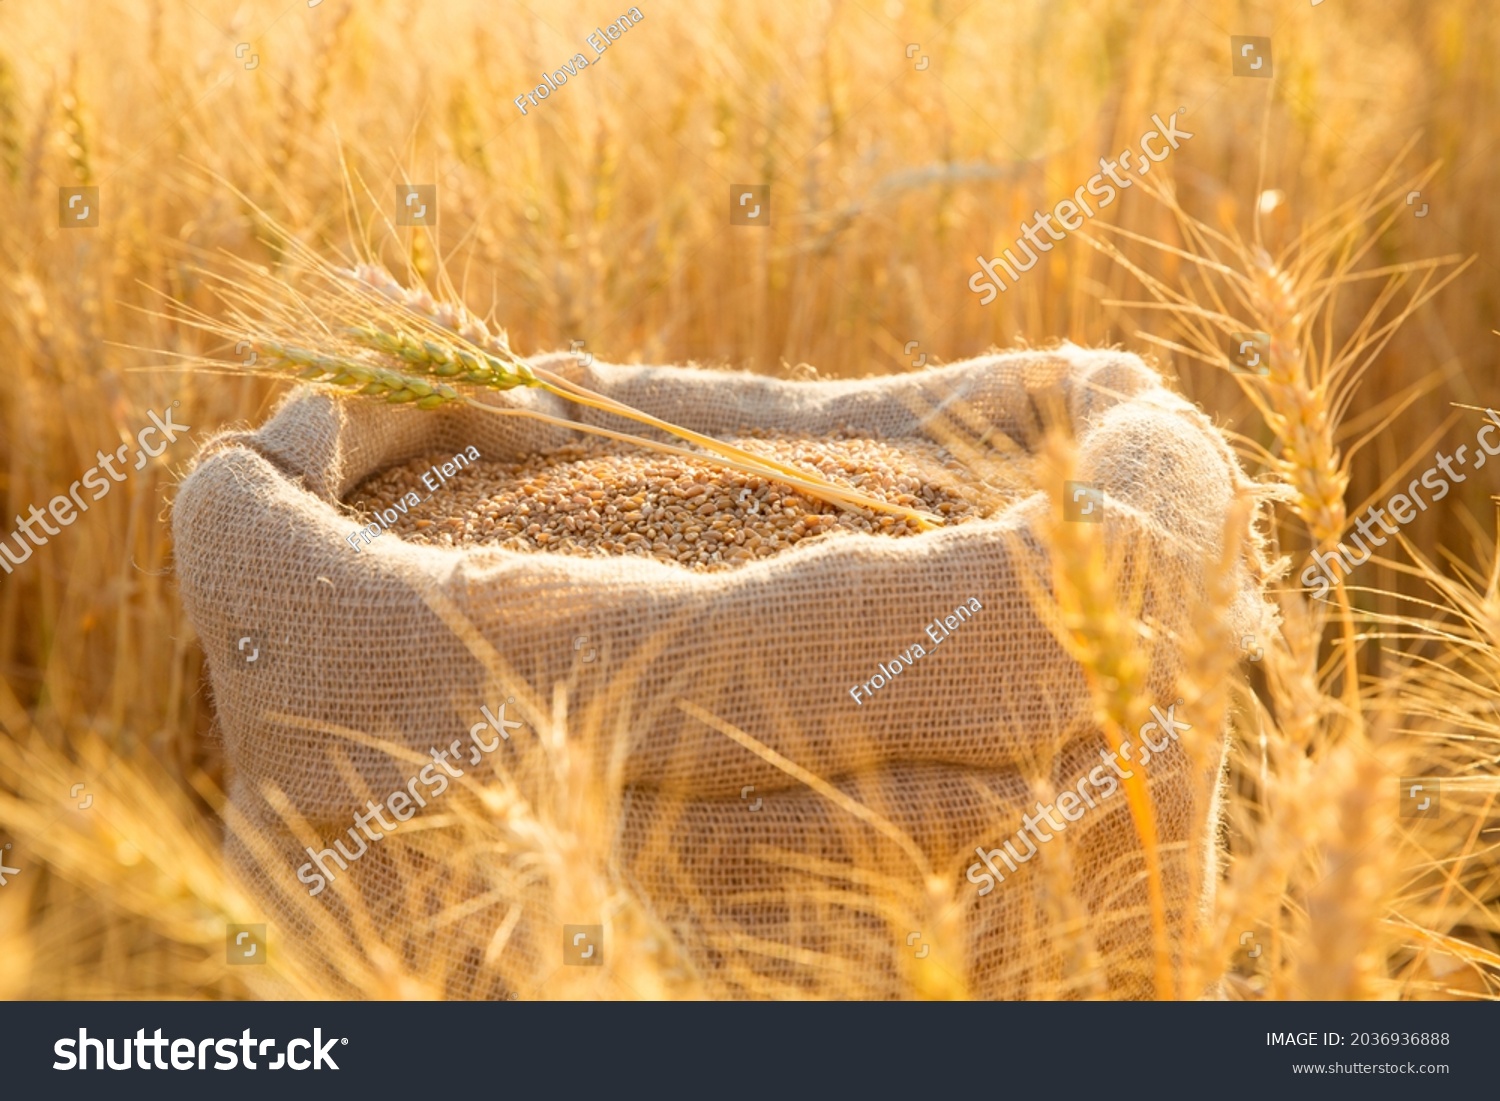 Canvas bag with wheat grains and mown wheat ears in field at sunset. Concept of grain harvesting in agriculture #2036936888